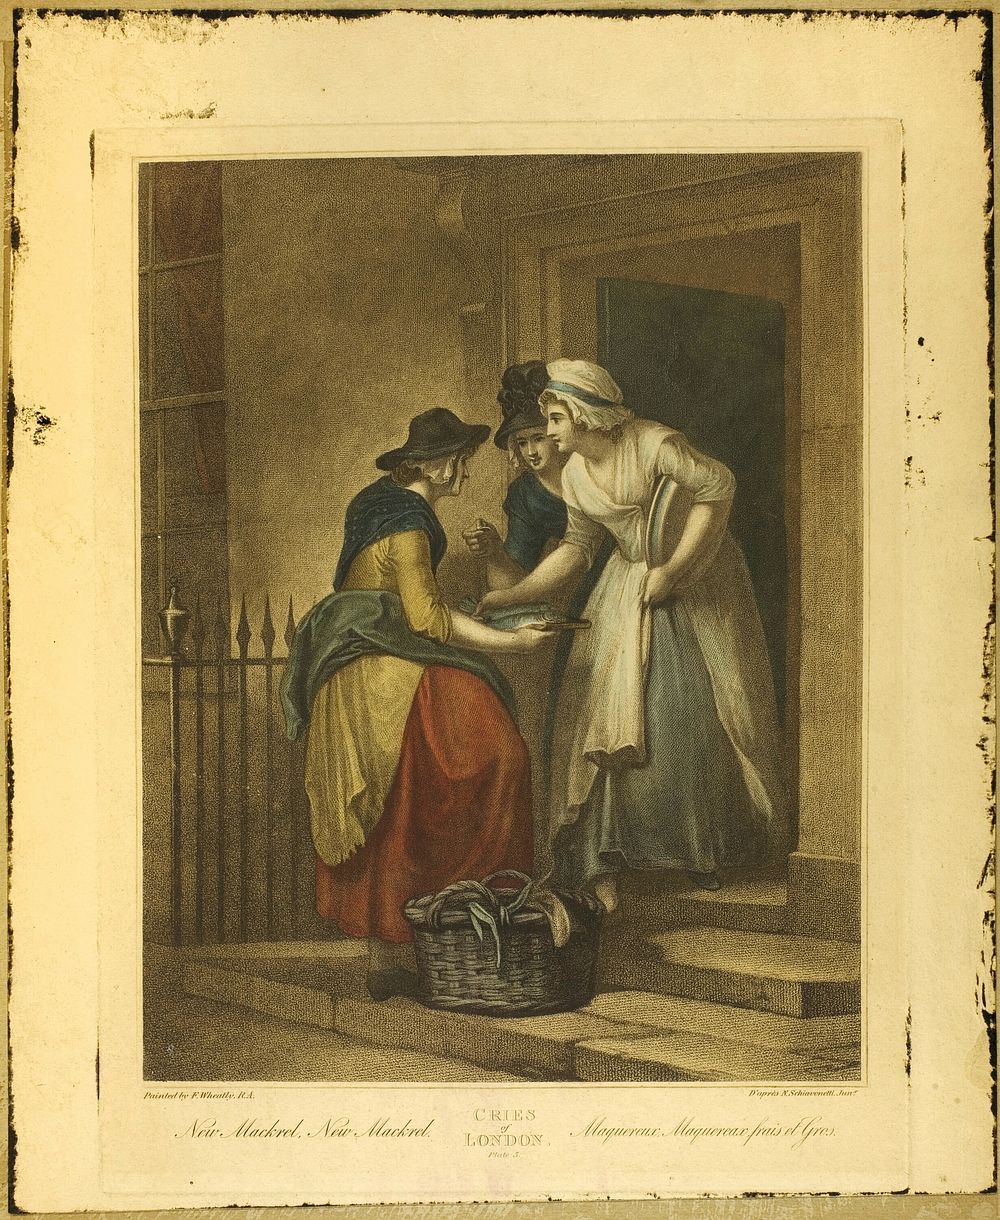 New Mack'rel, New Mackrel, Plate 5 from The Cries of London by Francis Wheatley